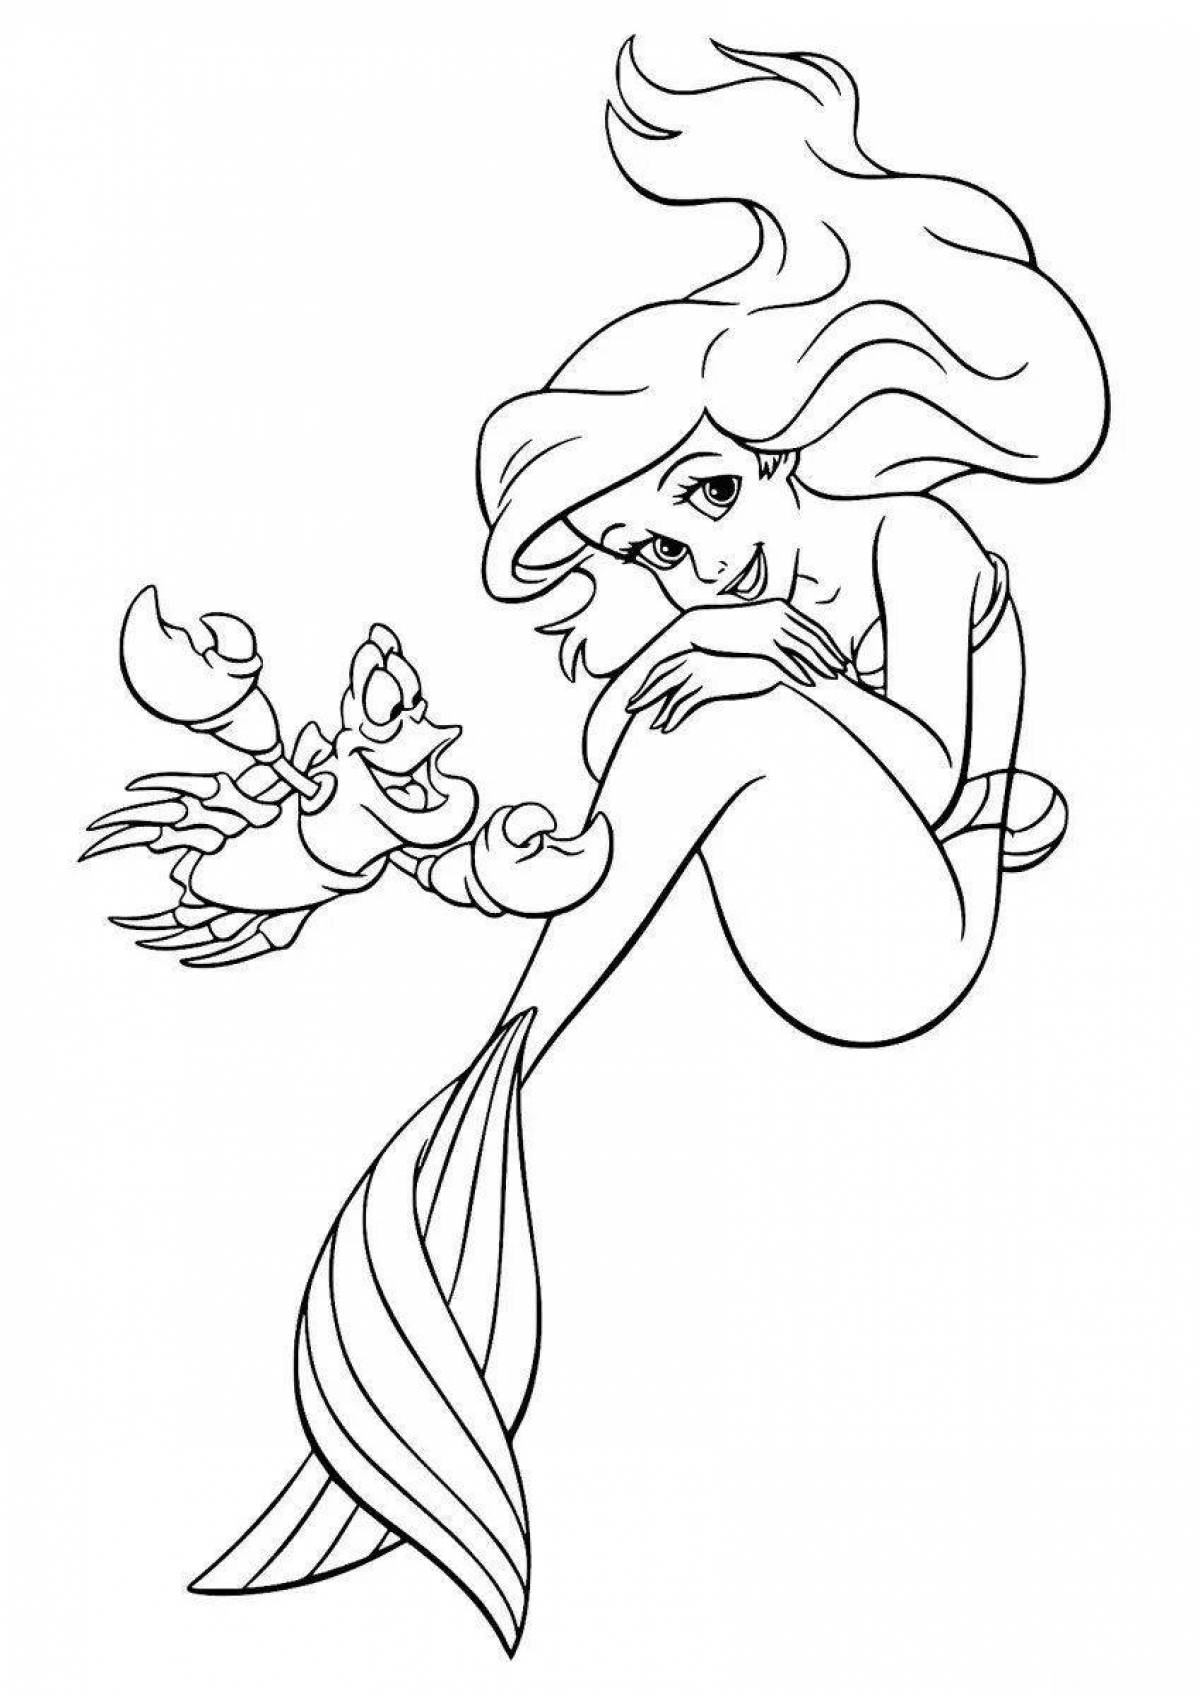 Exalted ariel the little mermaid coloring book for kids